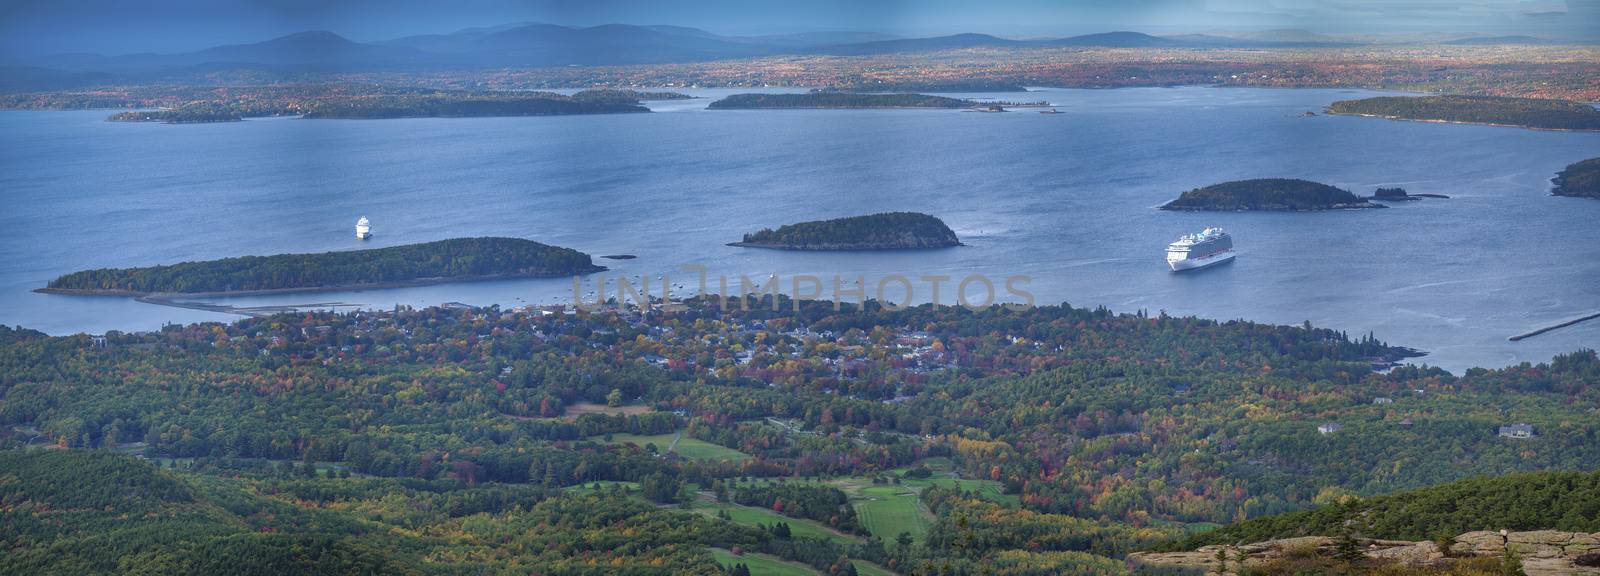 Panoramic view of beautiful New England foliage landscape from C by jovannig